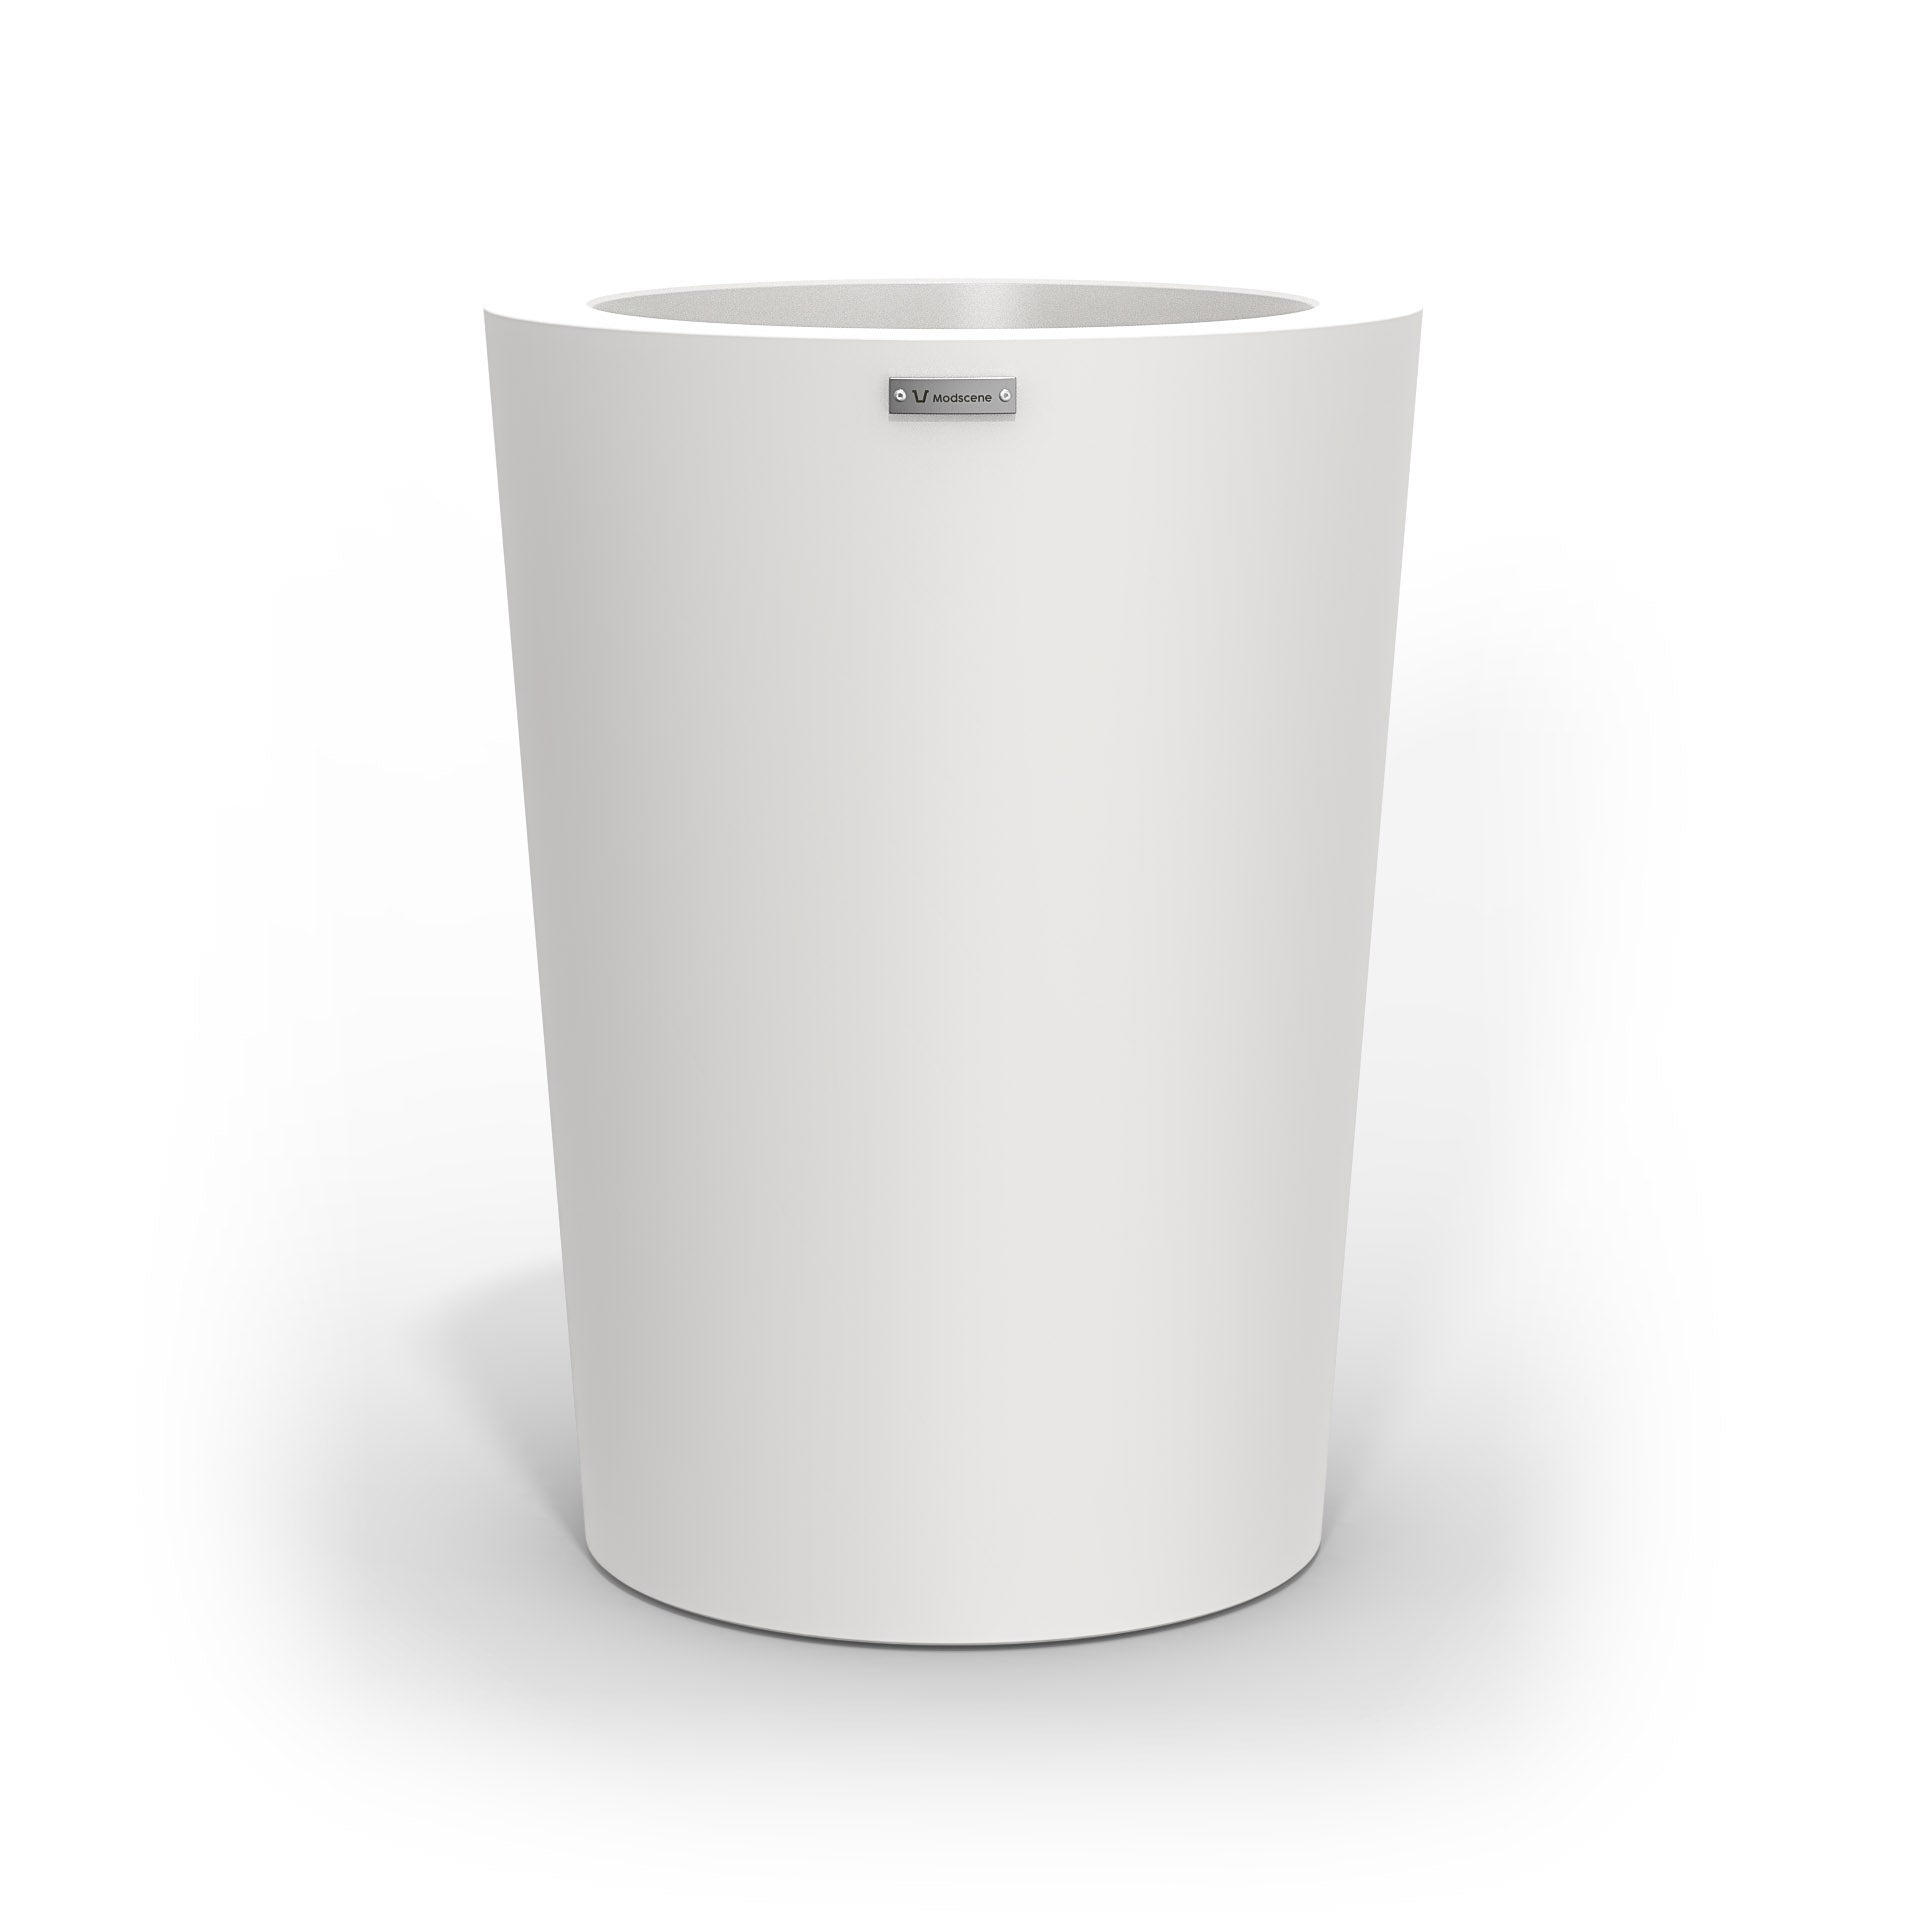 A modern style planter pot in white. Made by Modscene NZ.